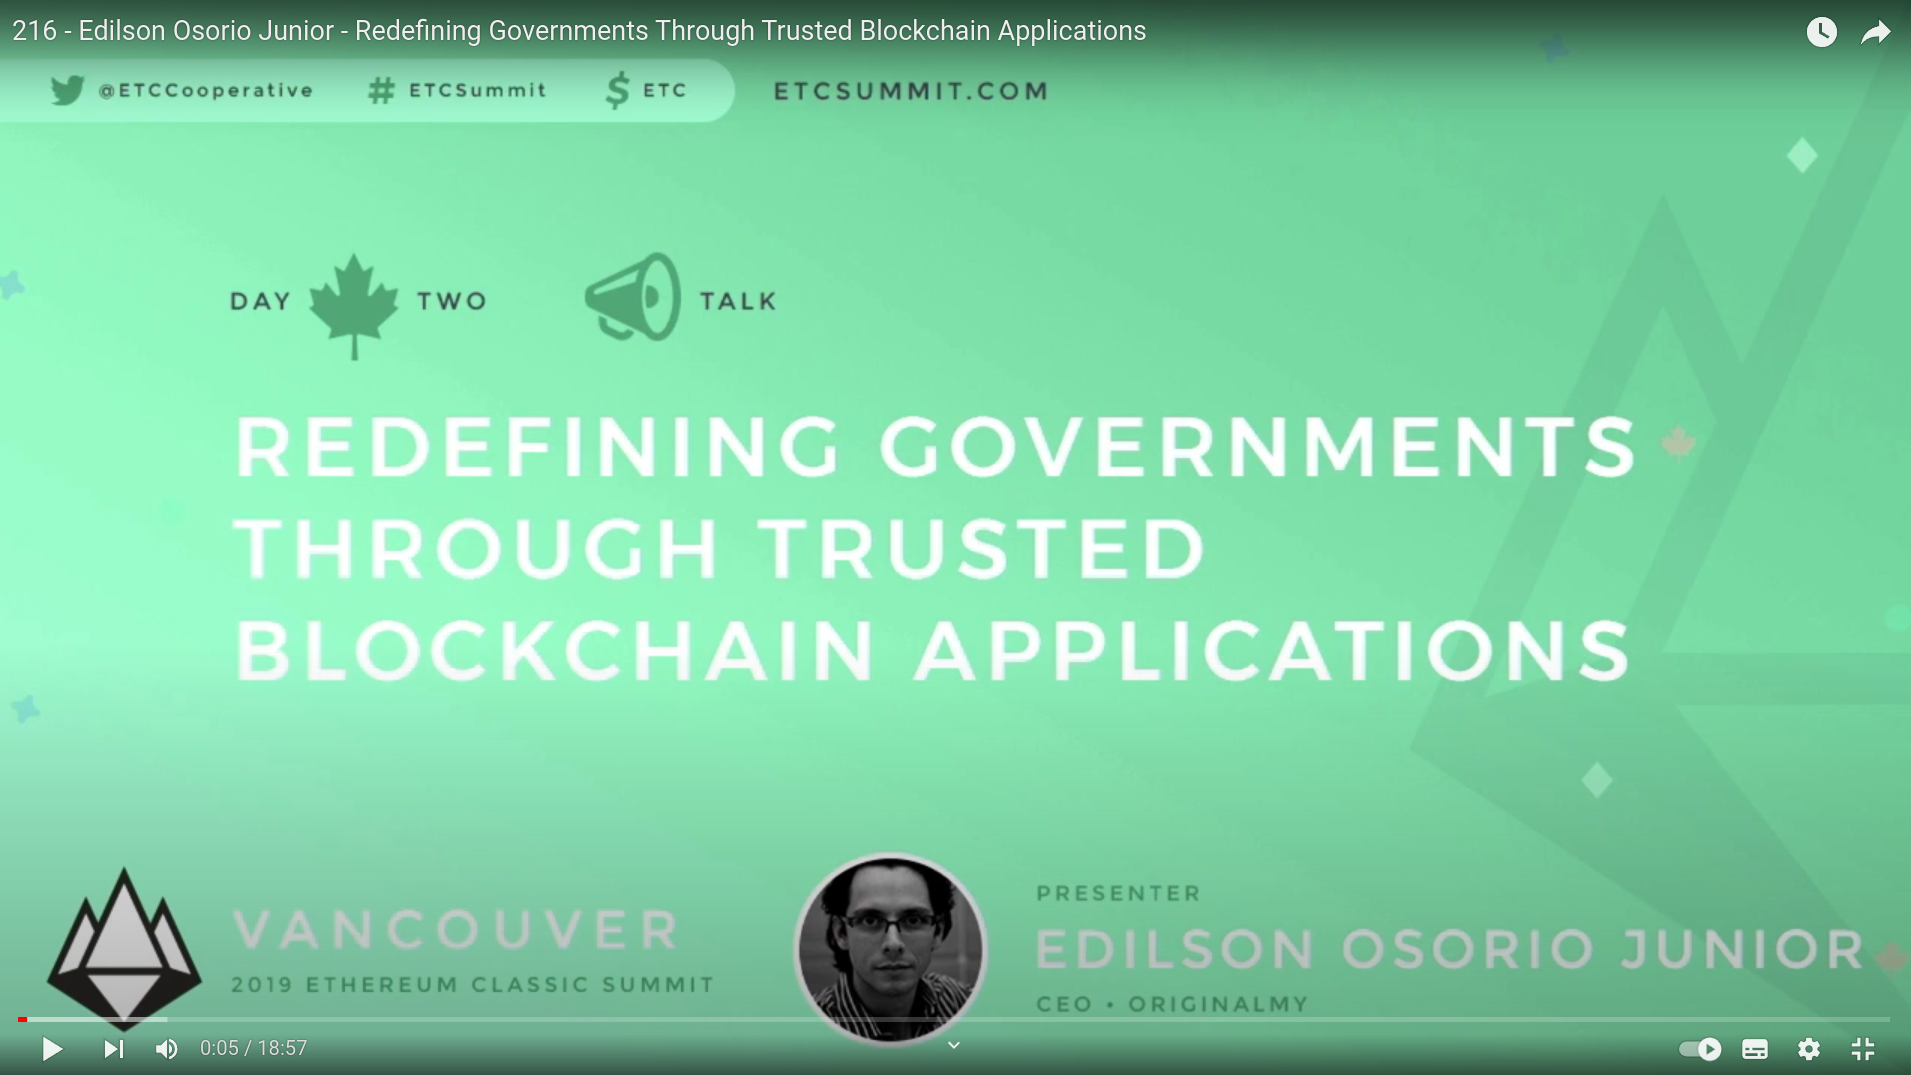 Redefining Governments Through Trusted Blockchain Applications